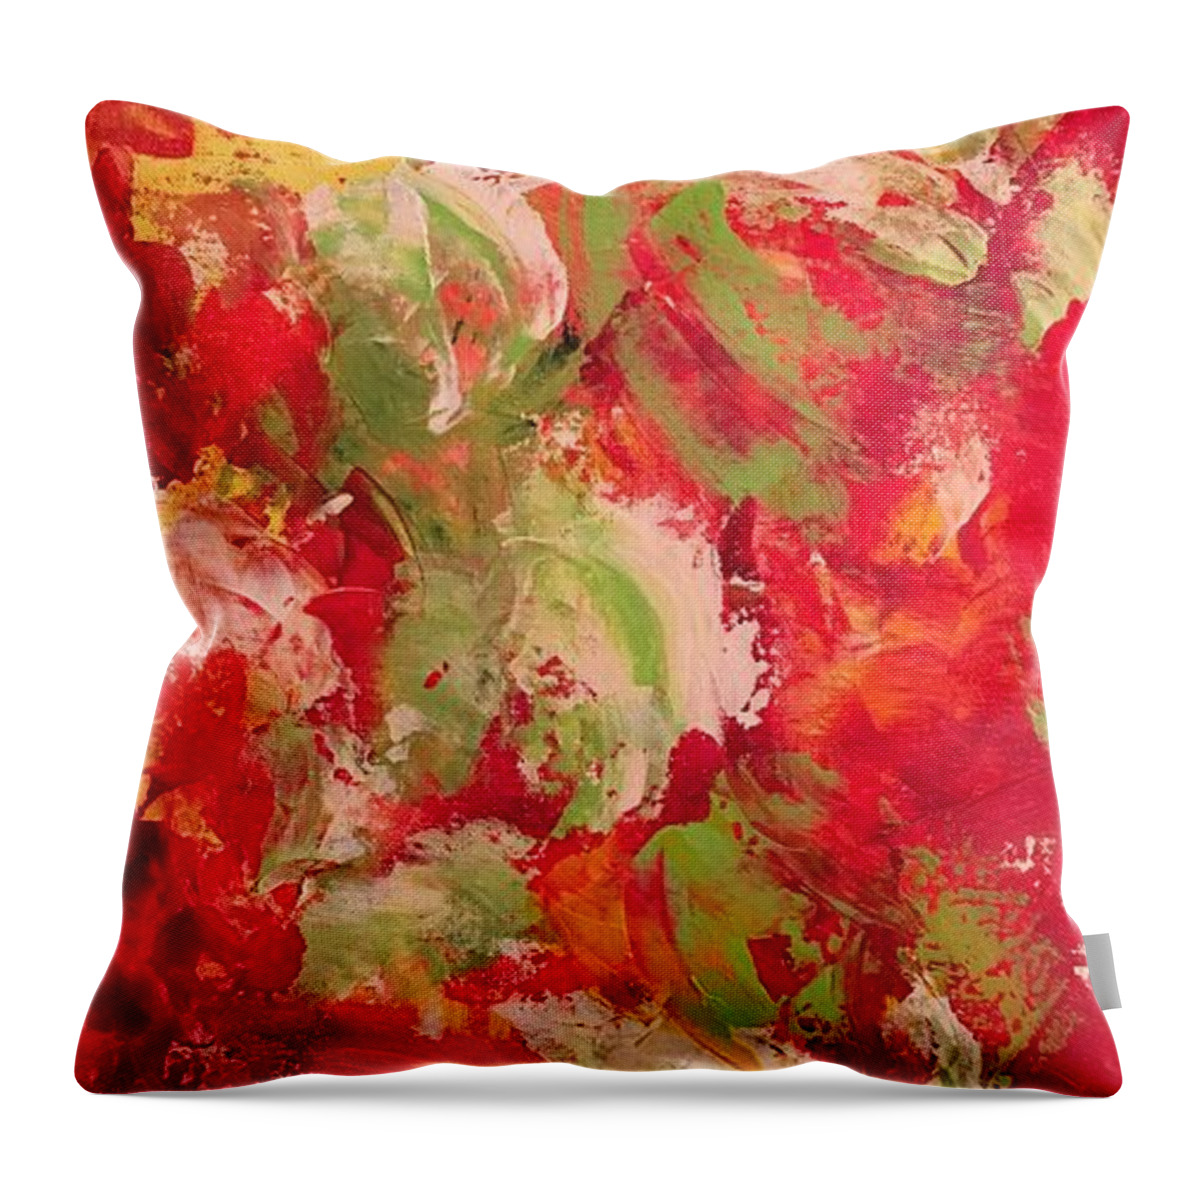 Abstract Throw Pillow featuring the painting Farmer's Market by Claire Gagnon